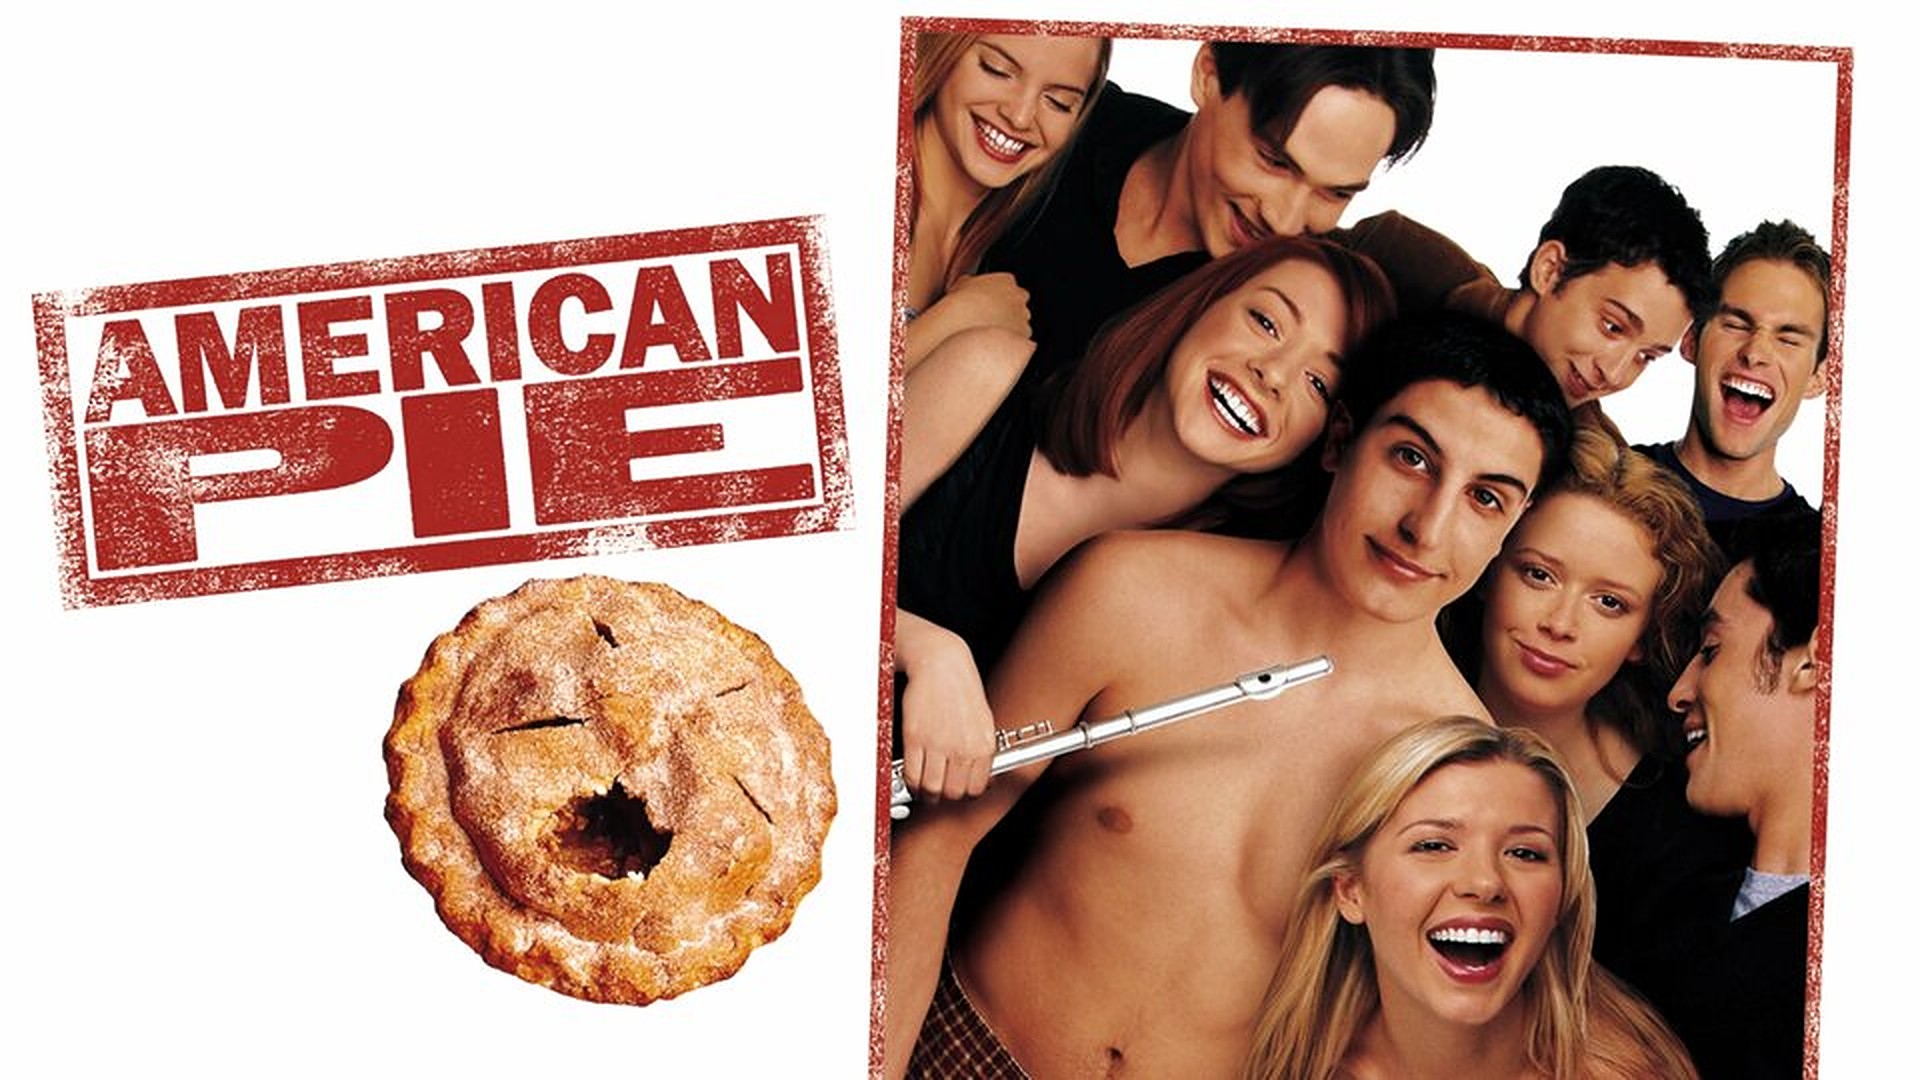 43-facts-about-the-movie-american-pie